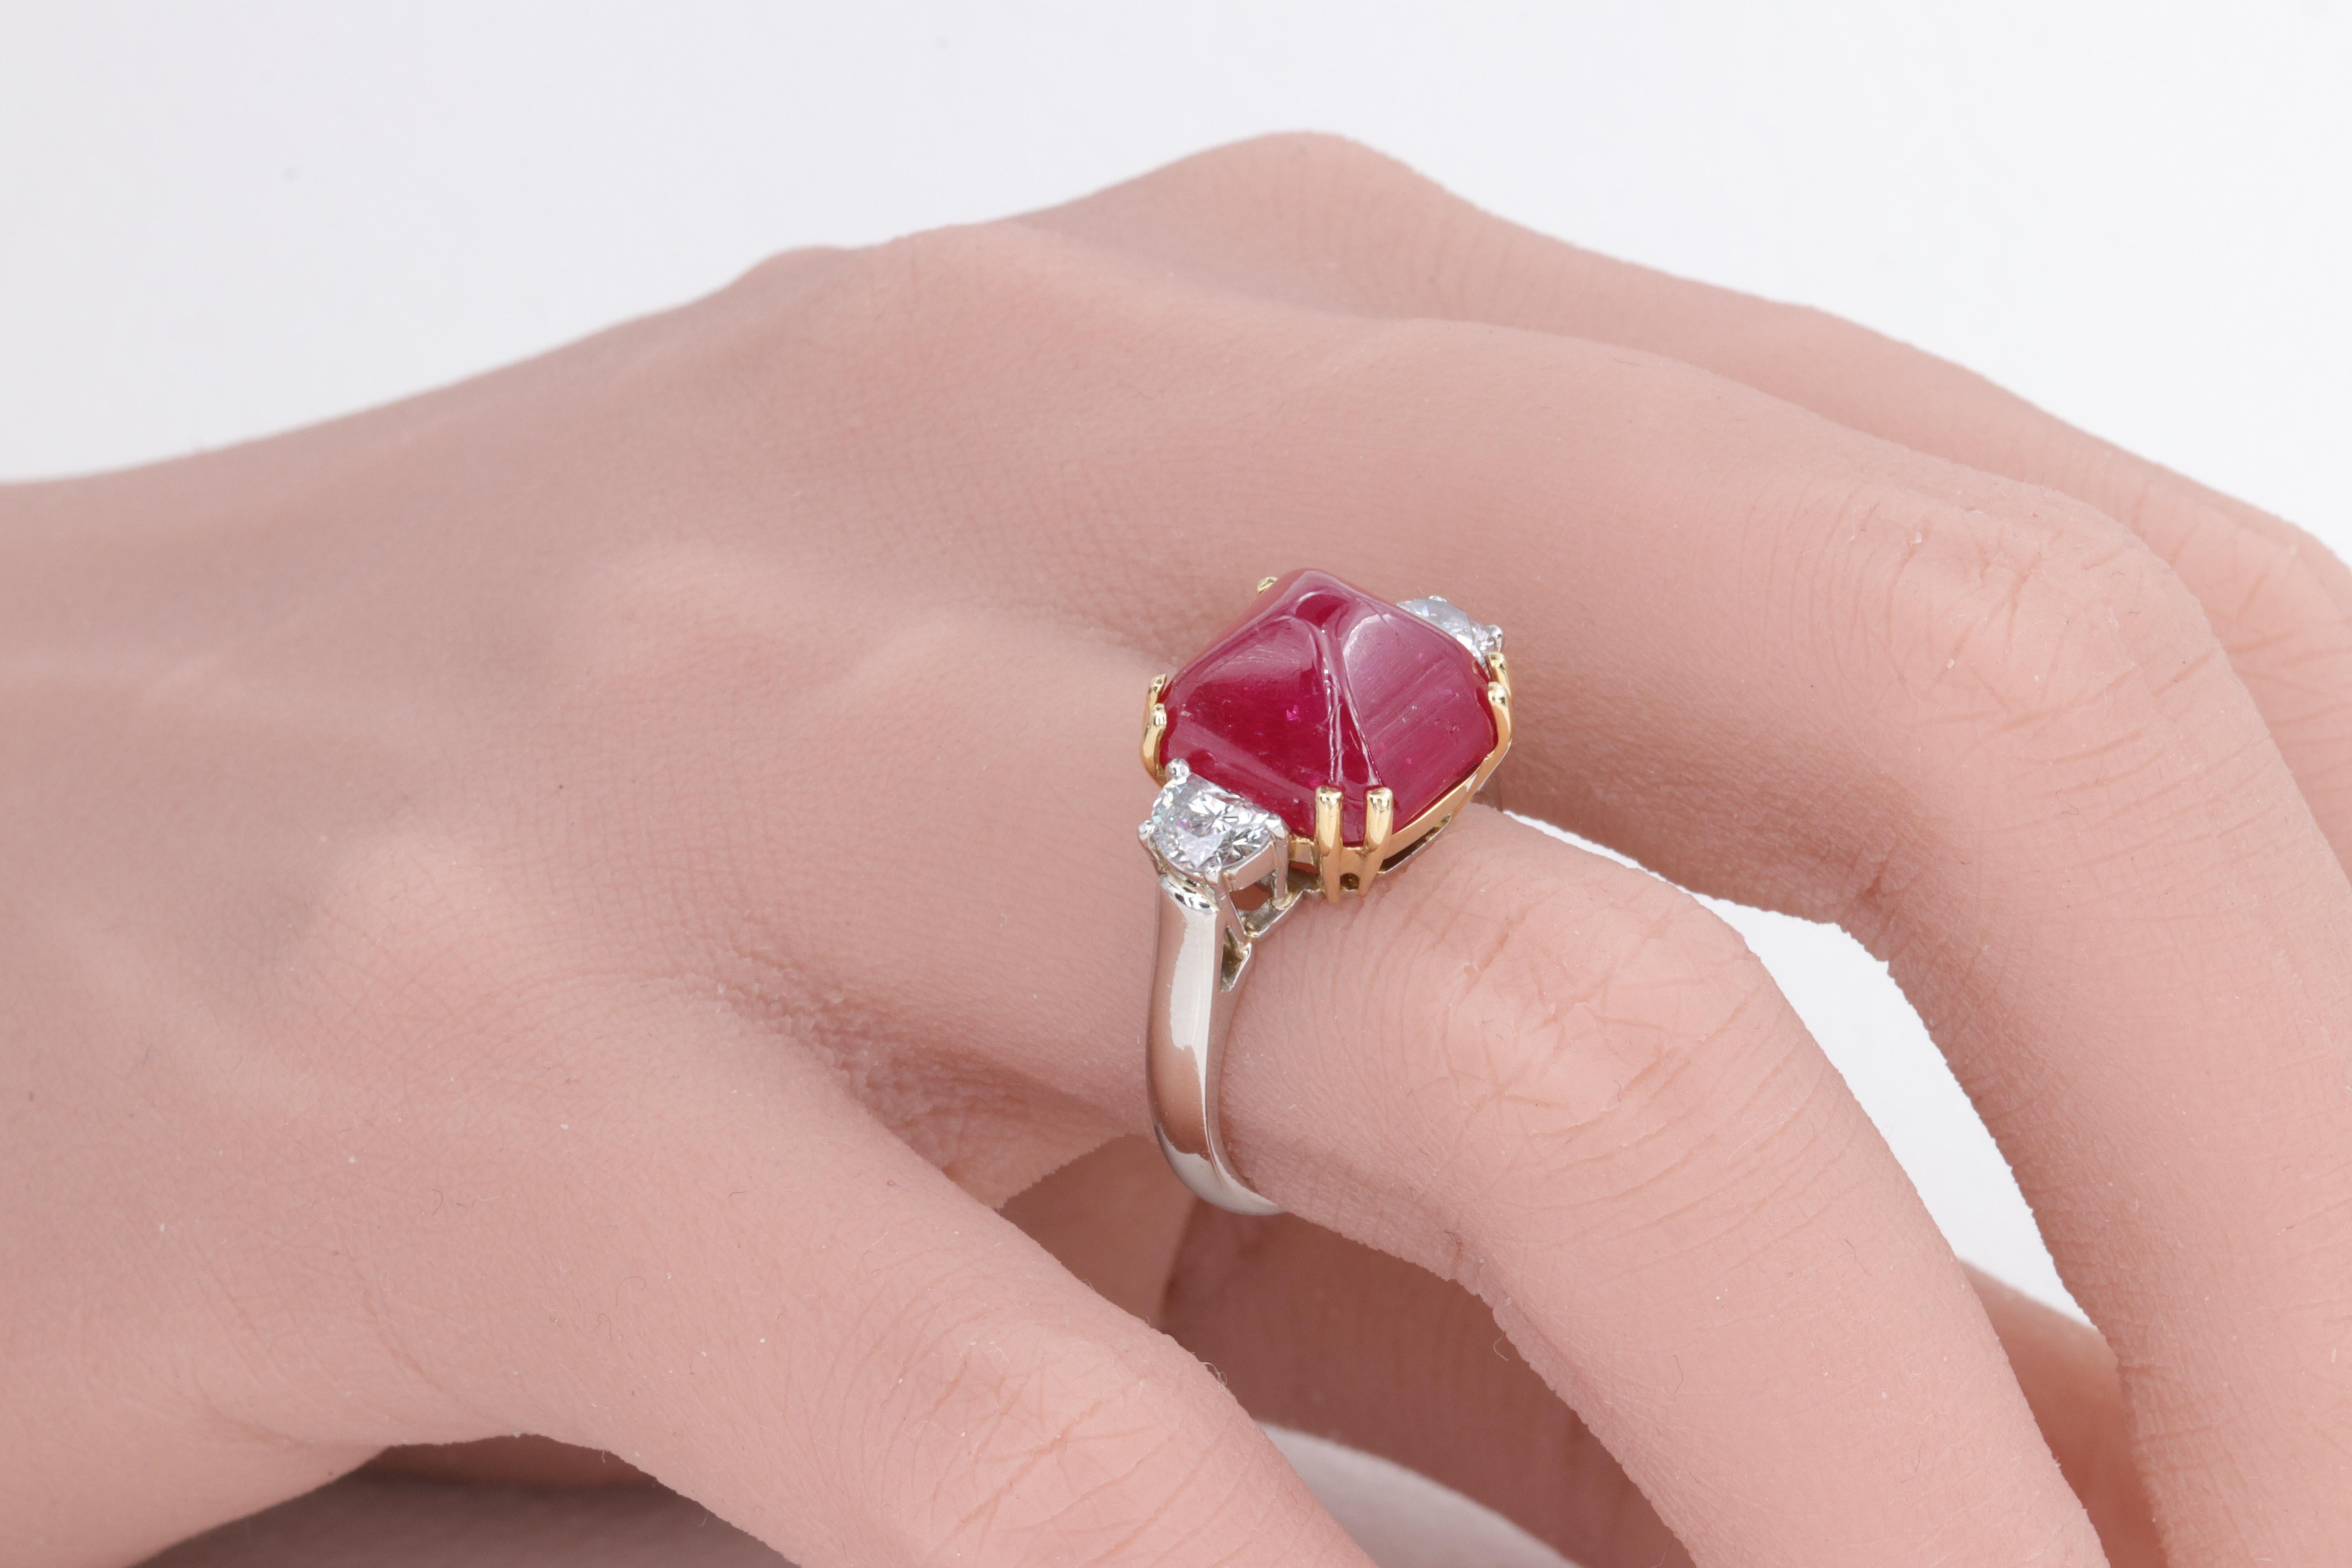 11.24 Carat Burma No Heat Ruby Sugar Loaf & Half Moon Cut Diamond 3 Stone Ring

Featuring a rare and large 11.24 carat sugar loaf ruby with gorgeous vivid red color certified by the Gemological Institute of America (GIA) as having a Burma origin and